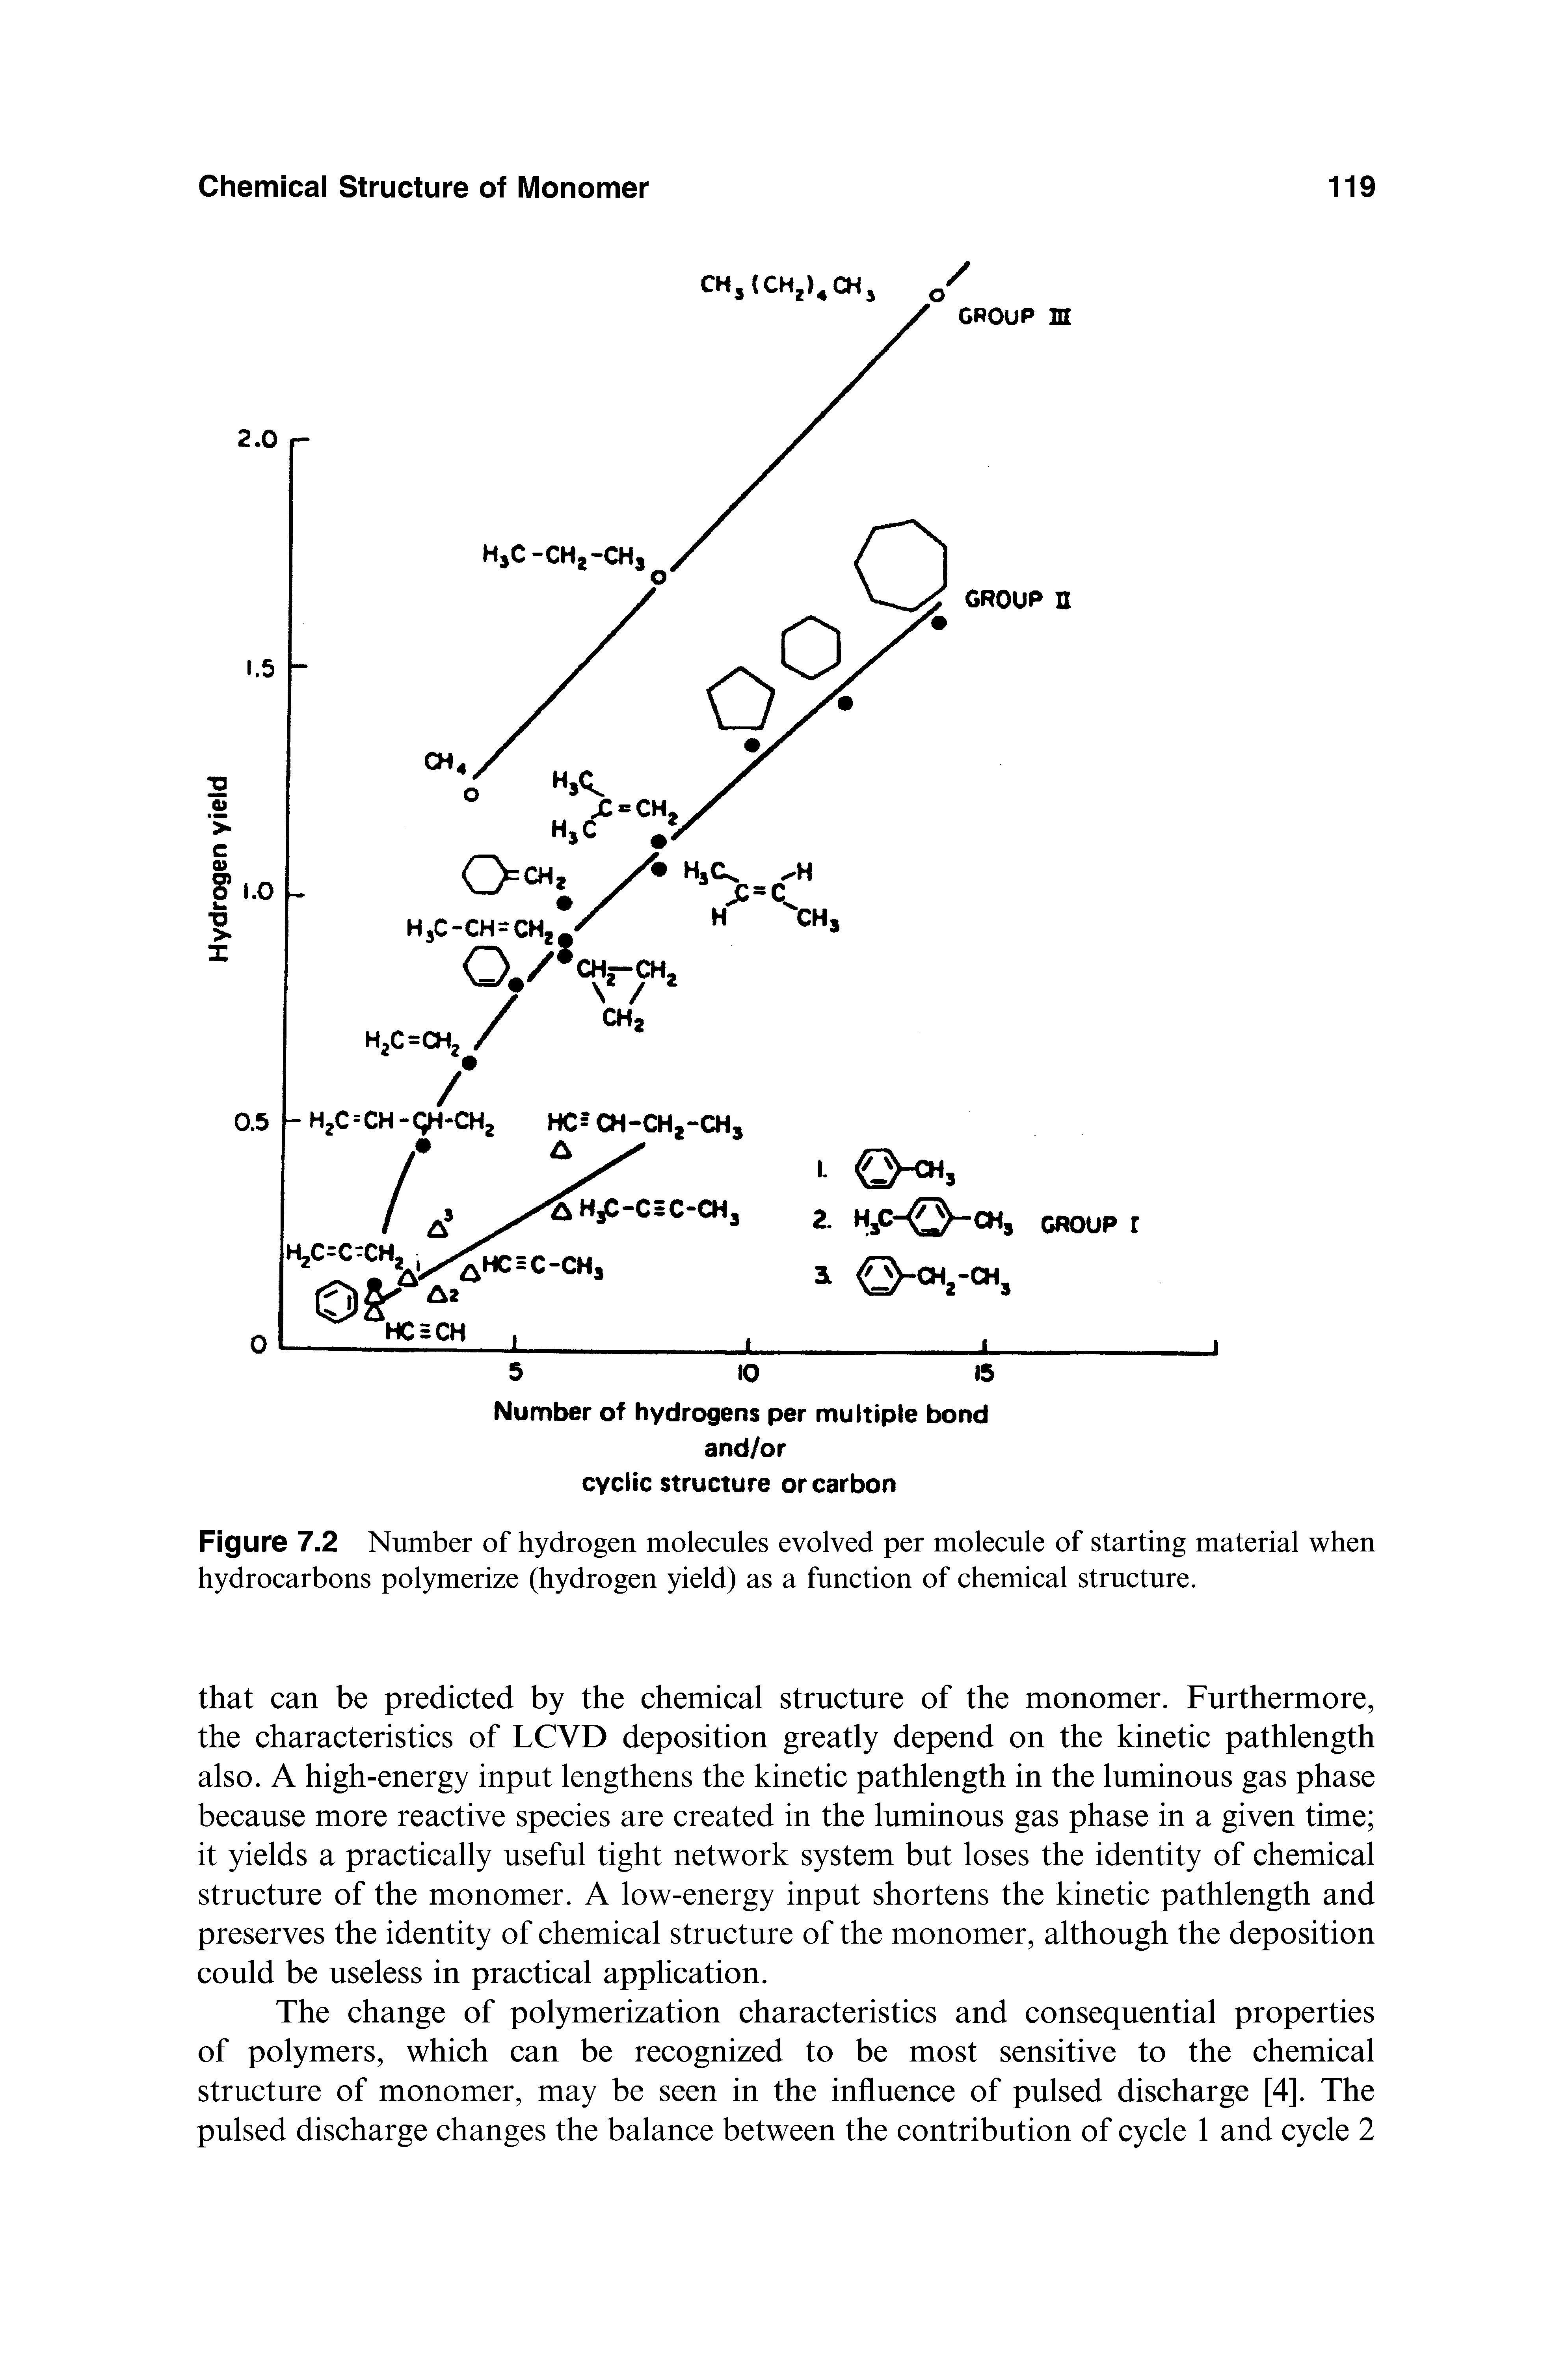 Figure 7.2 Number of hydrogen molecules evolved per molecule of starting material when hydrocarbons polymerize (hydrogen yield) as a function of chemical structure.